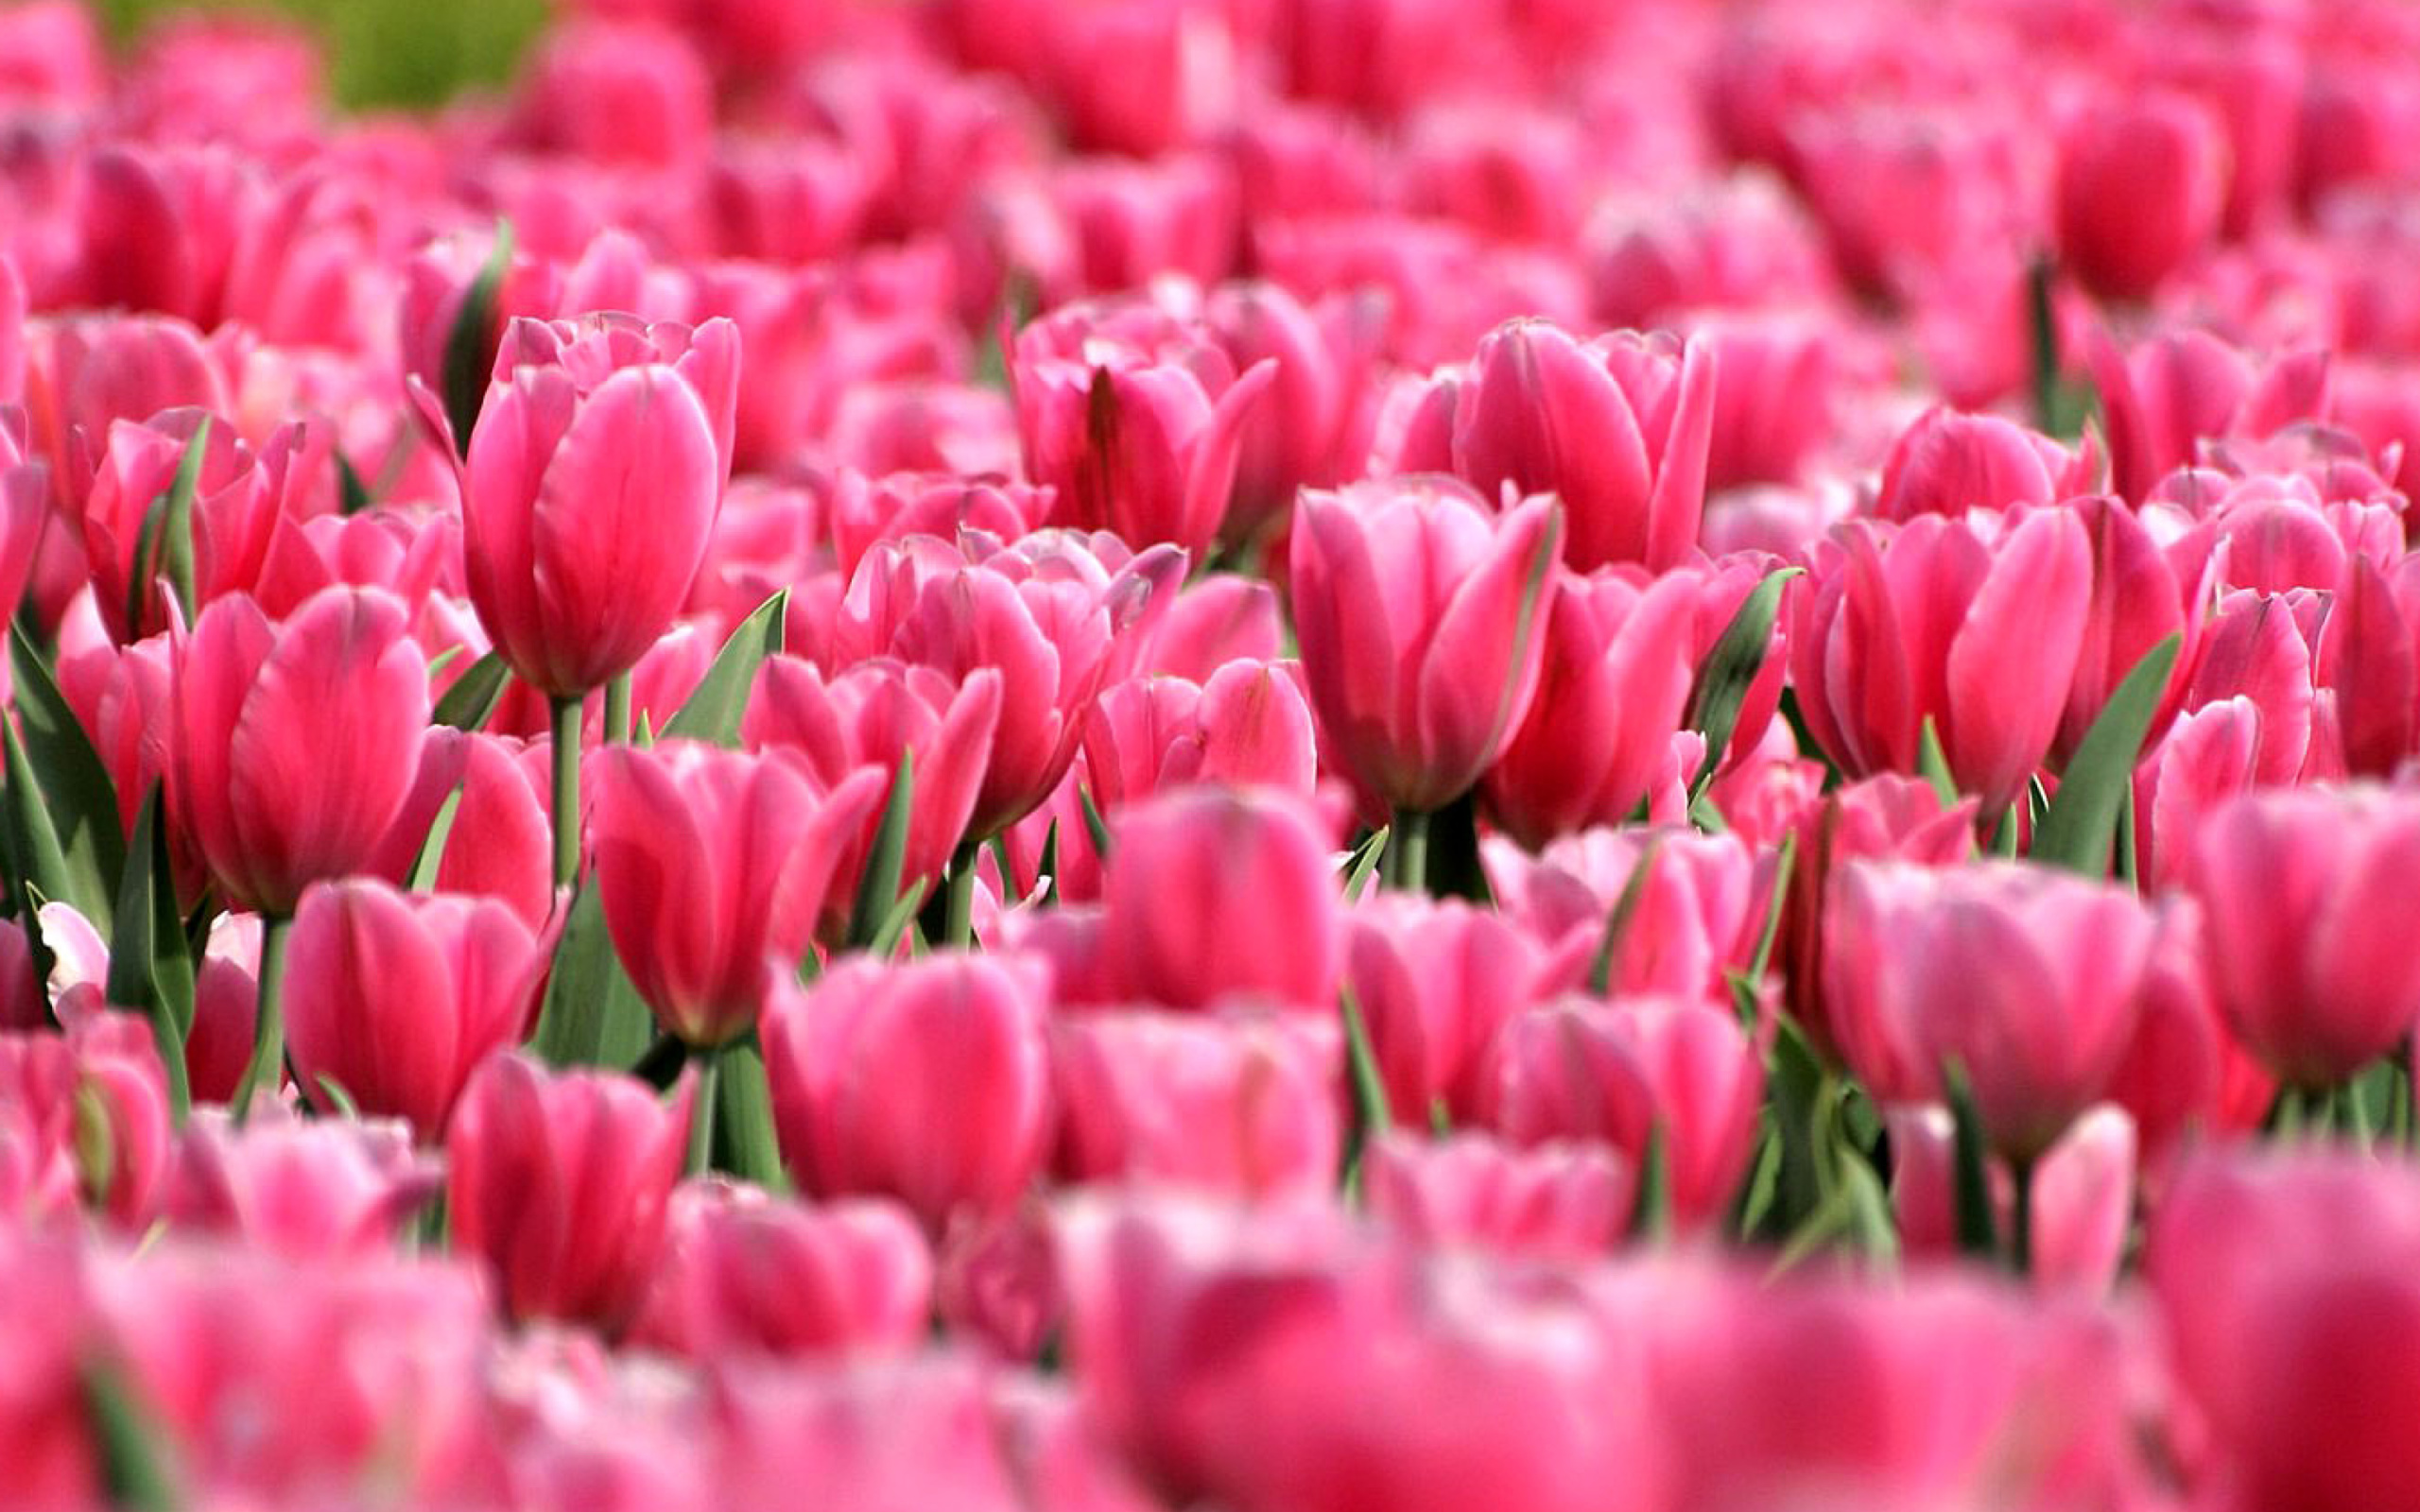 Pink Tulips in Holland Festival wallpaper 2560x1600